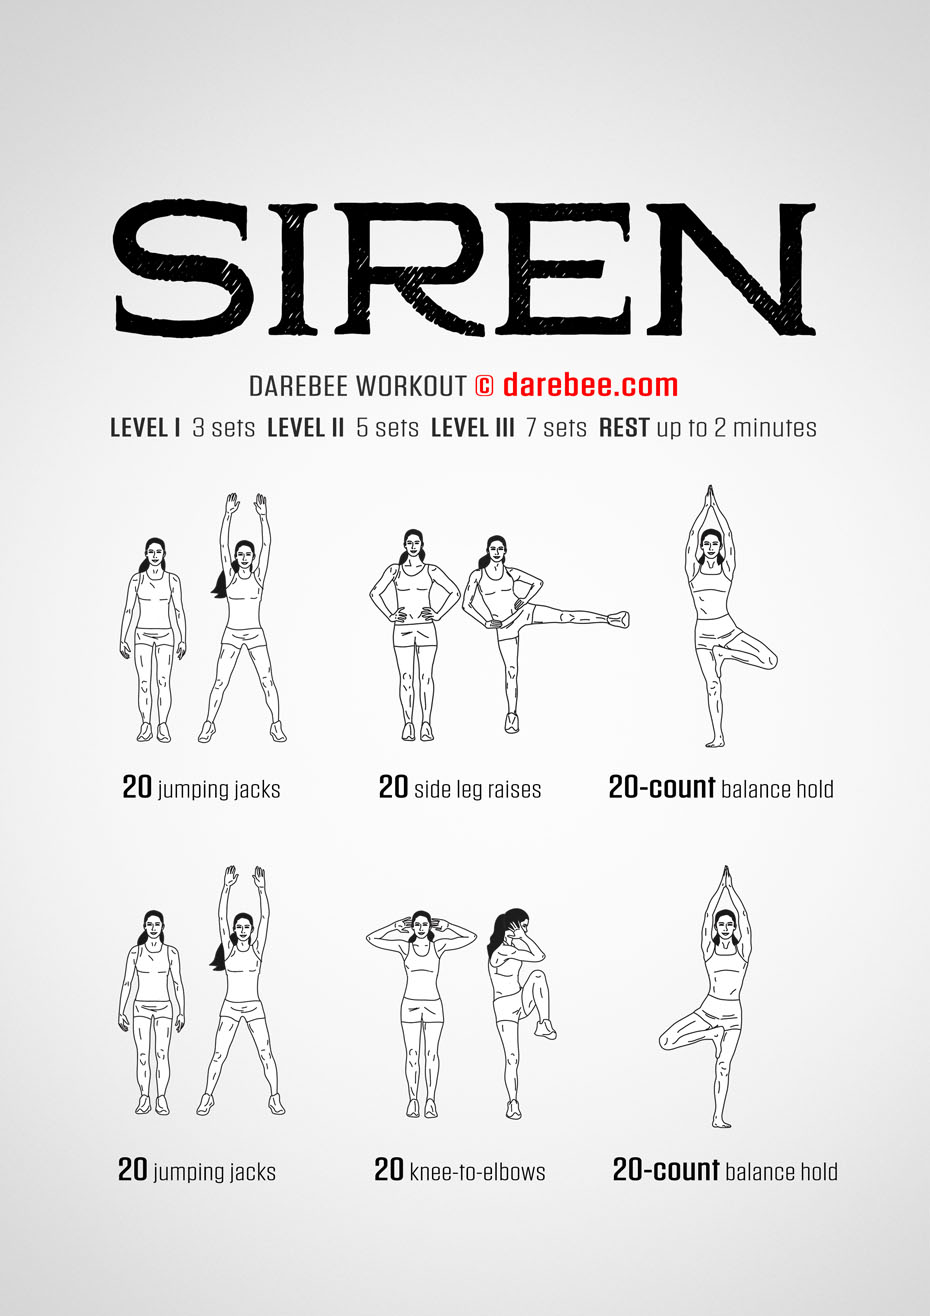 Siren is a DAREBEE home fitness, total body high burn, no-equipment aerobic and cardiovascular workout.